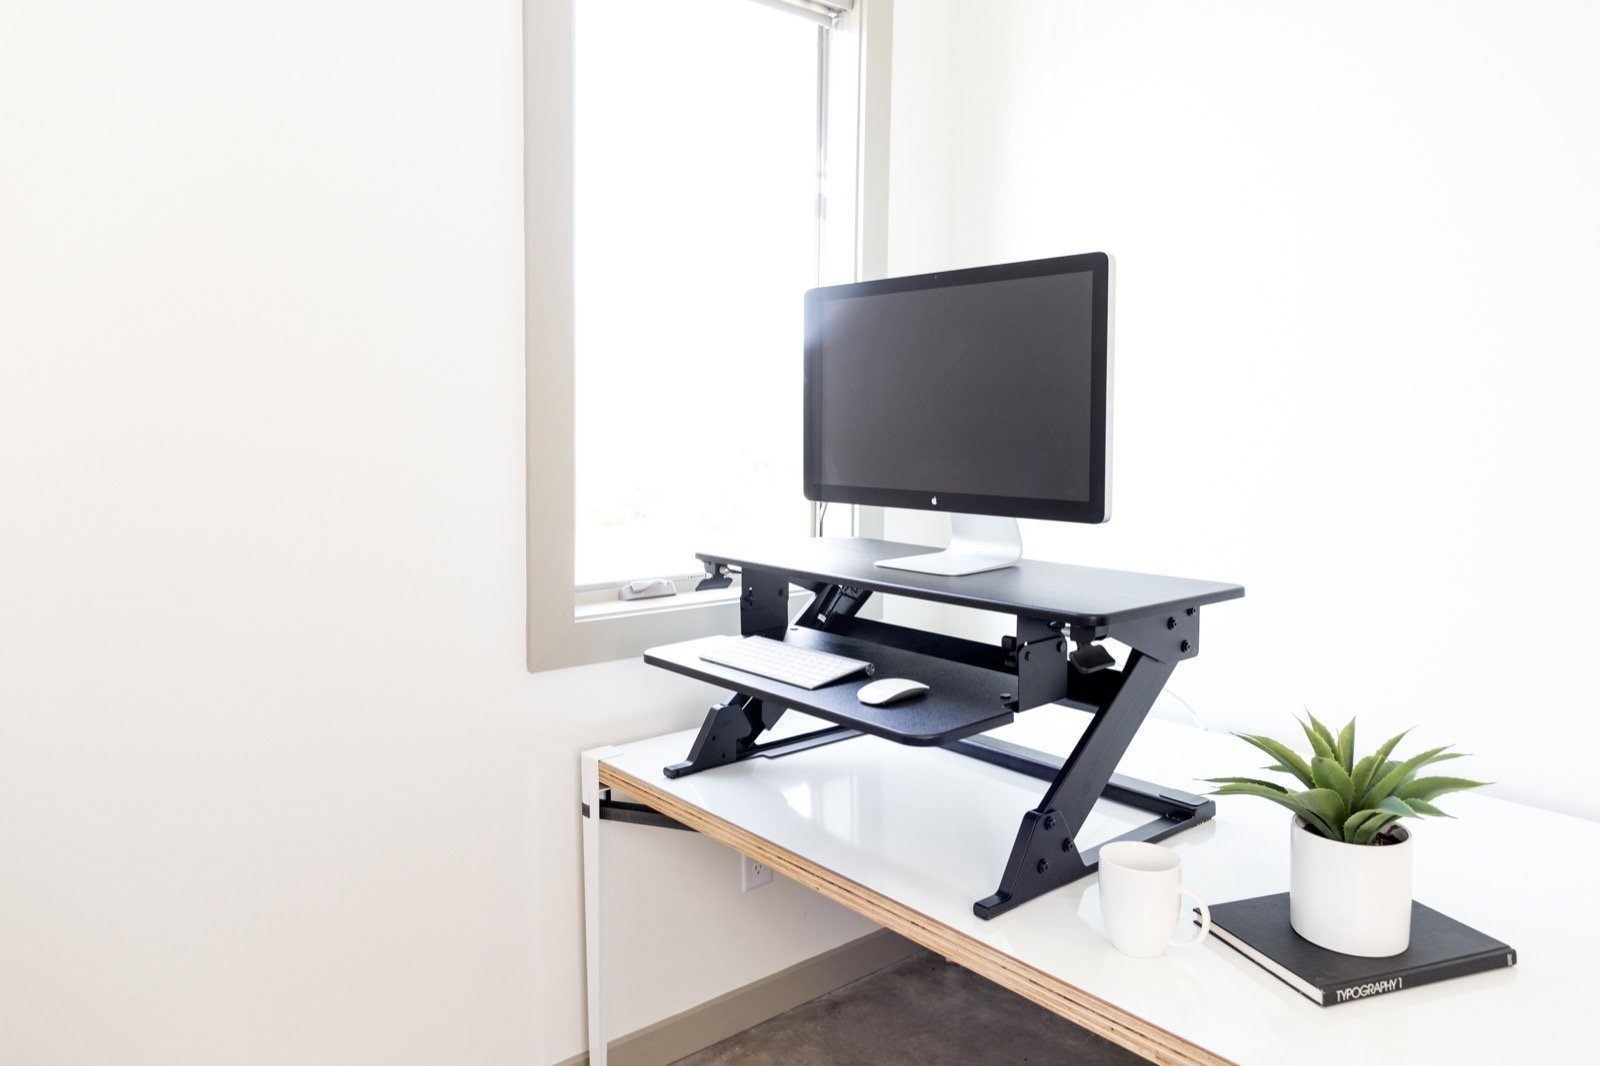 The Best Standing Desk for Local Government Employees Isn't Exactly What You’d Think